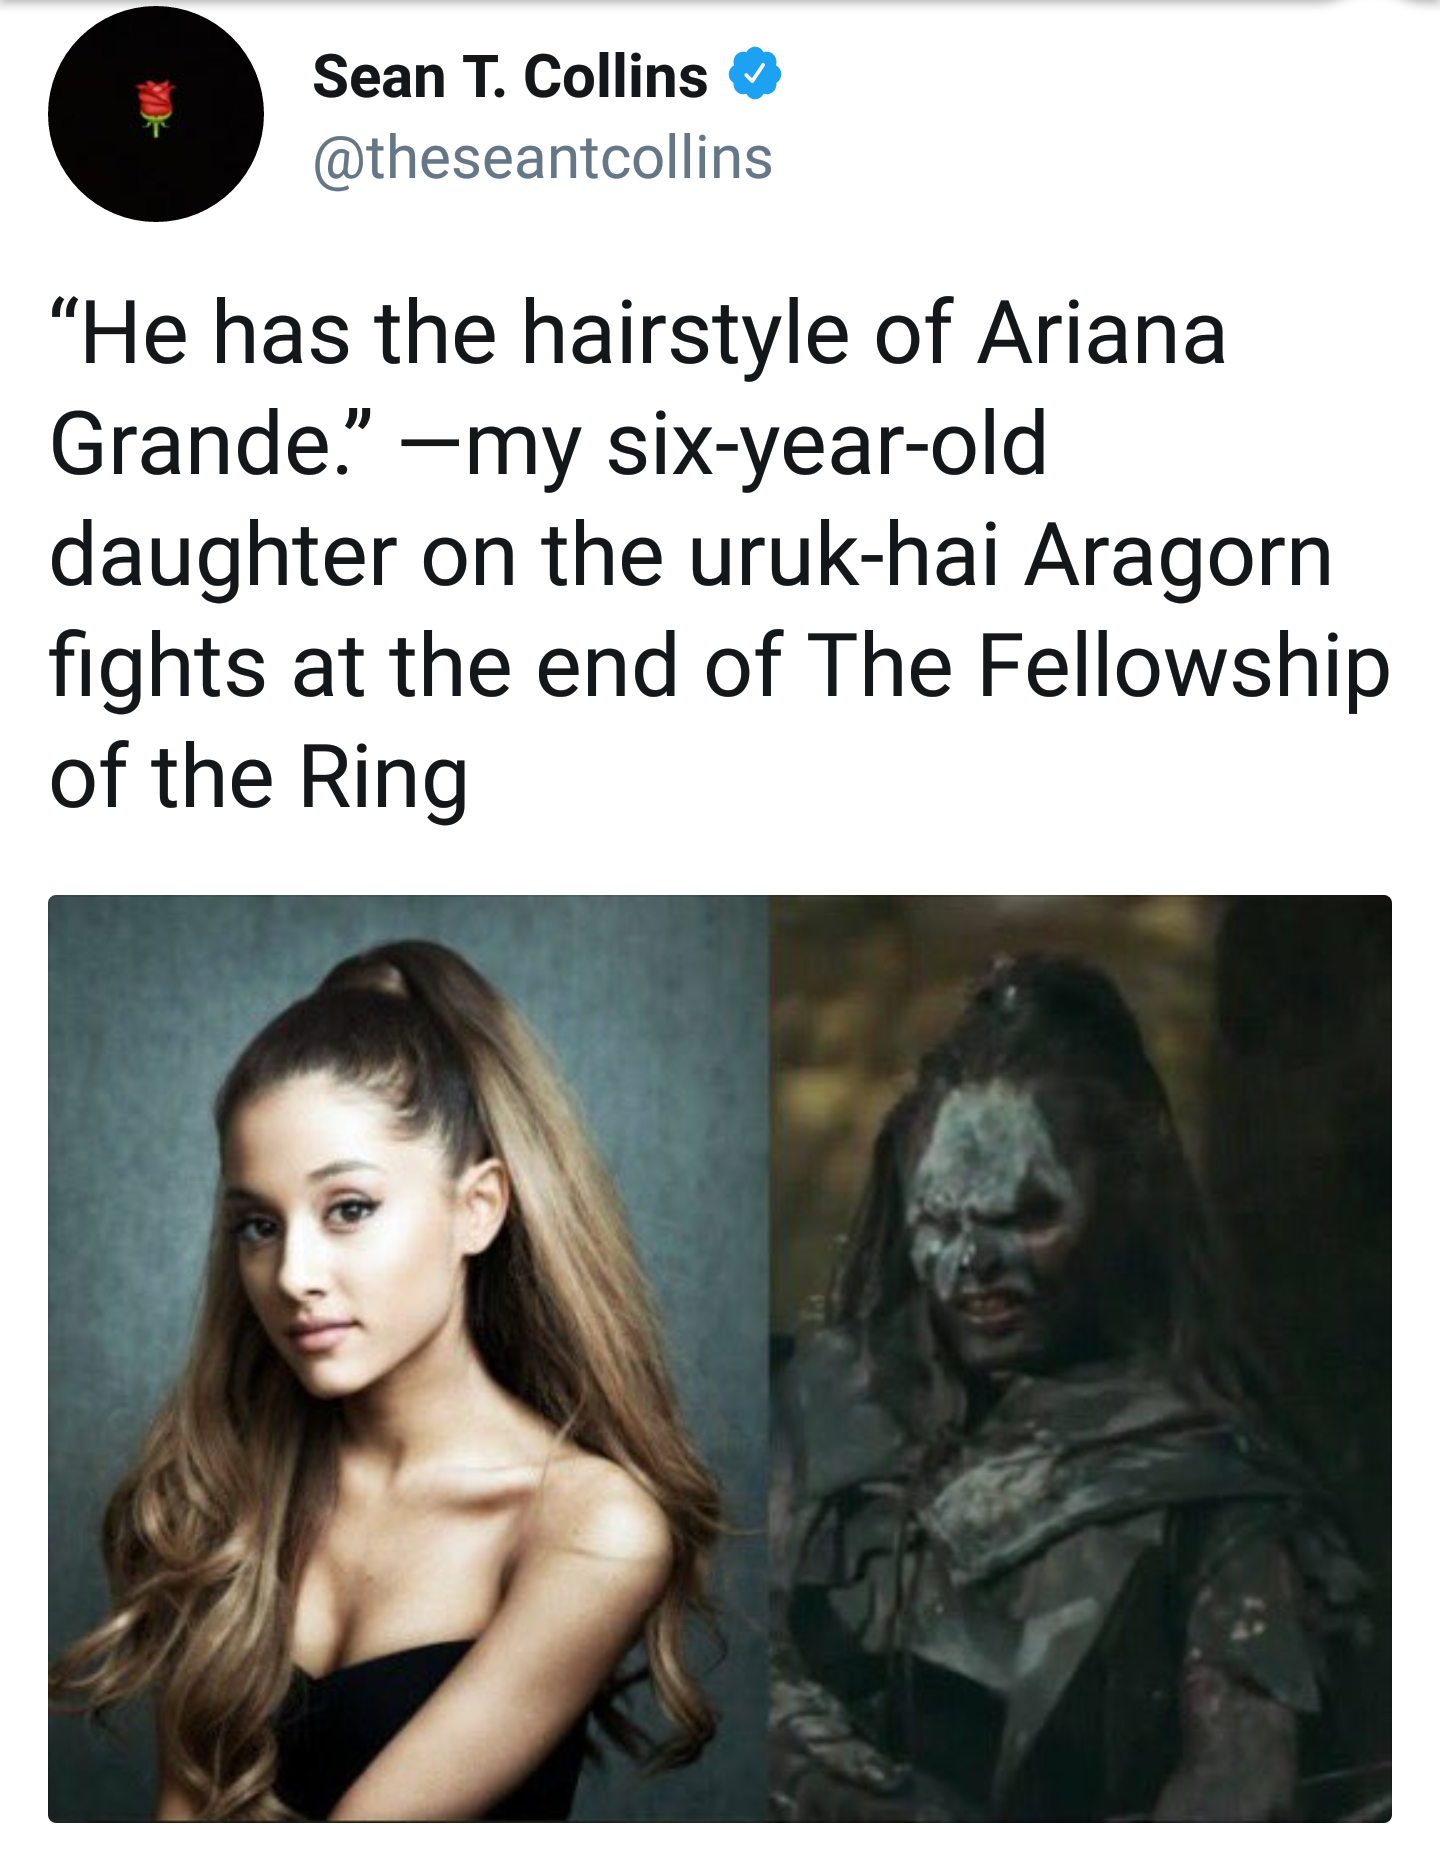 ariana grande uruk hai - Sean T. Collins "He has the hairstyle of Ariana Grande." my sixyearold daughter on the urukhai Aragorn fights at the end of The Fellowship of the Ring